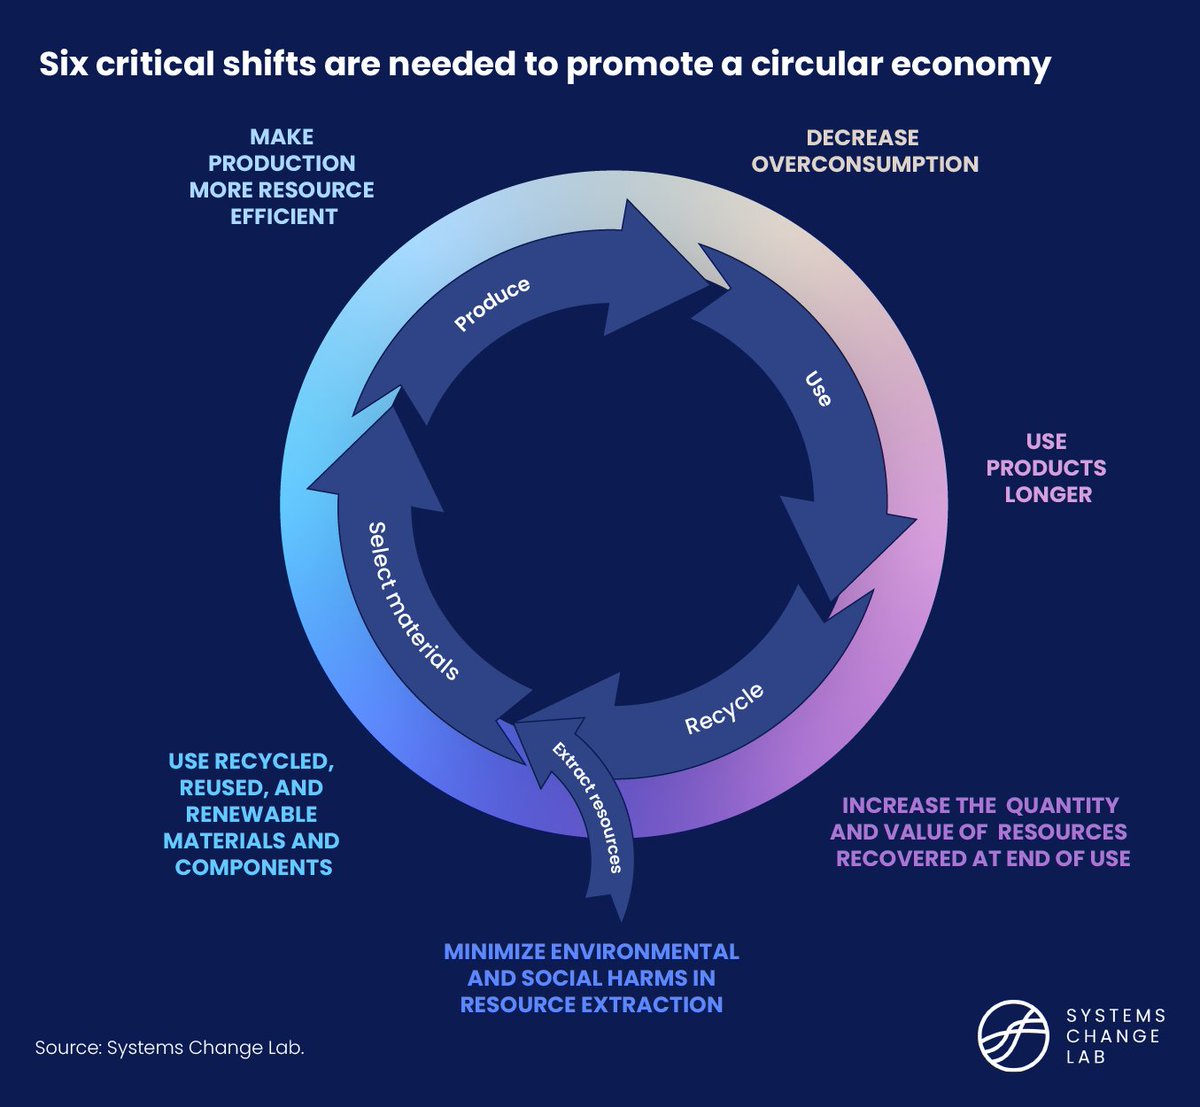 🔄 New findings from #SystemsChangeLab highlight the six critical shifts necessary to promote a #circulareconomy. 

Dive deeper▶️bit.ly/3TGdu4Q